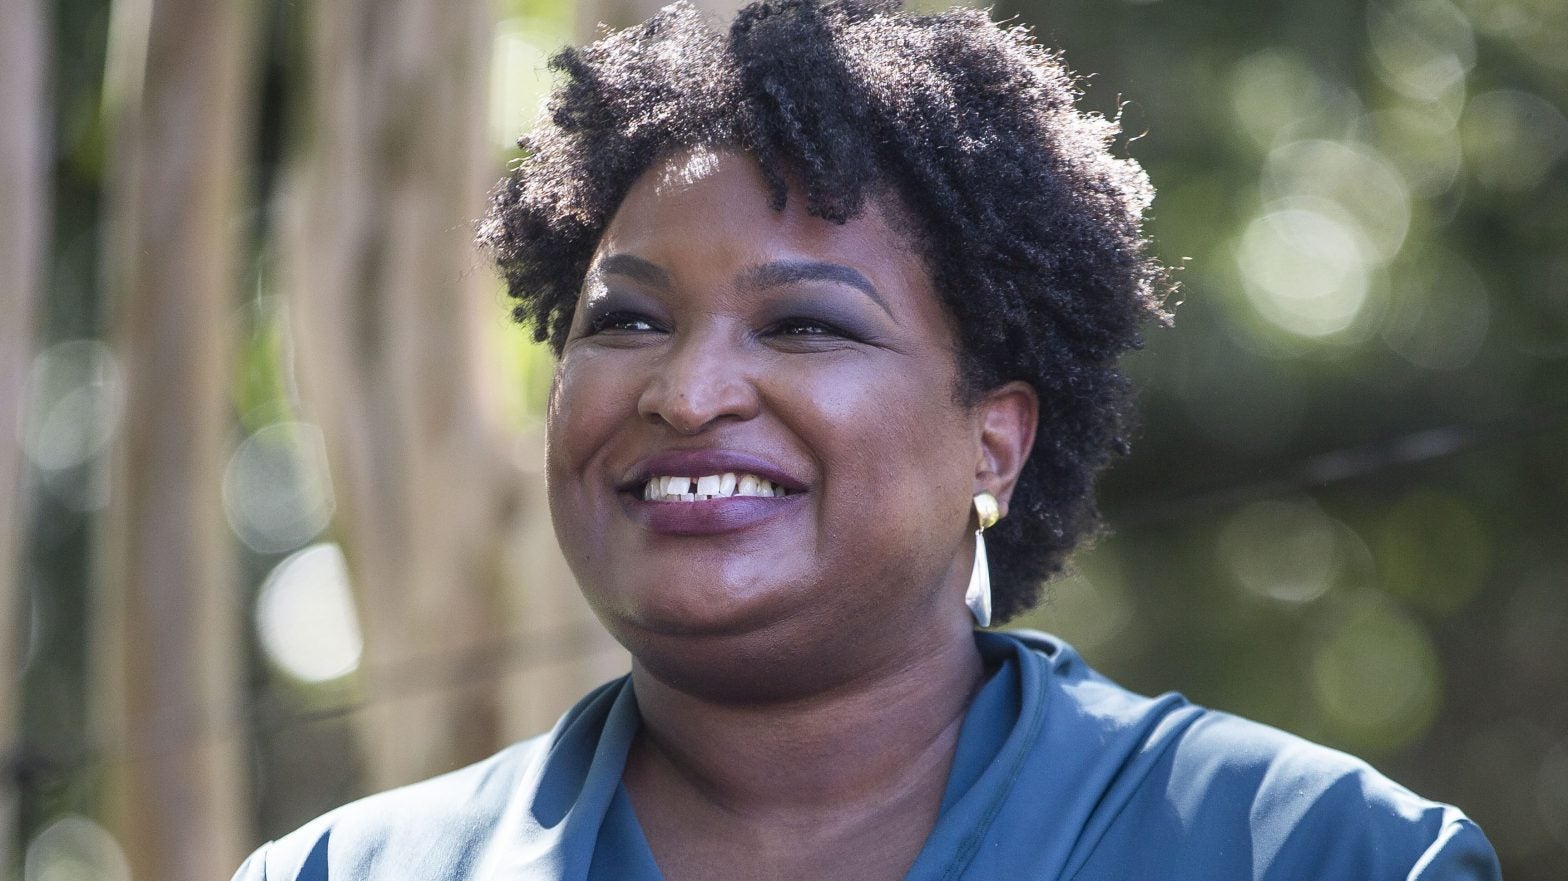 Stacey Abrams Clears Over $1 Million Medical Debt For Residents In 5 States